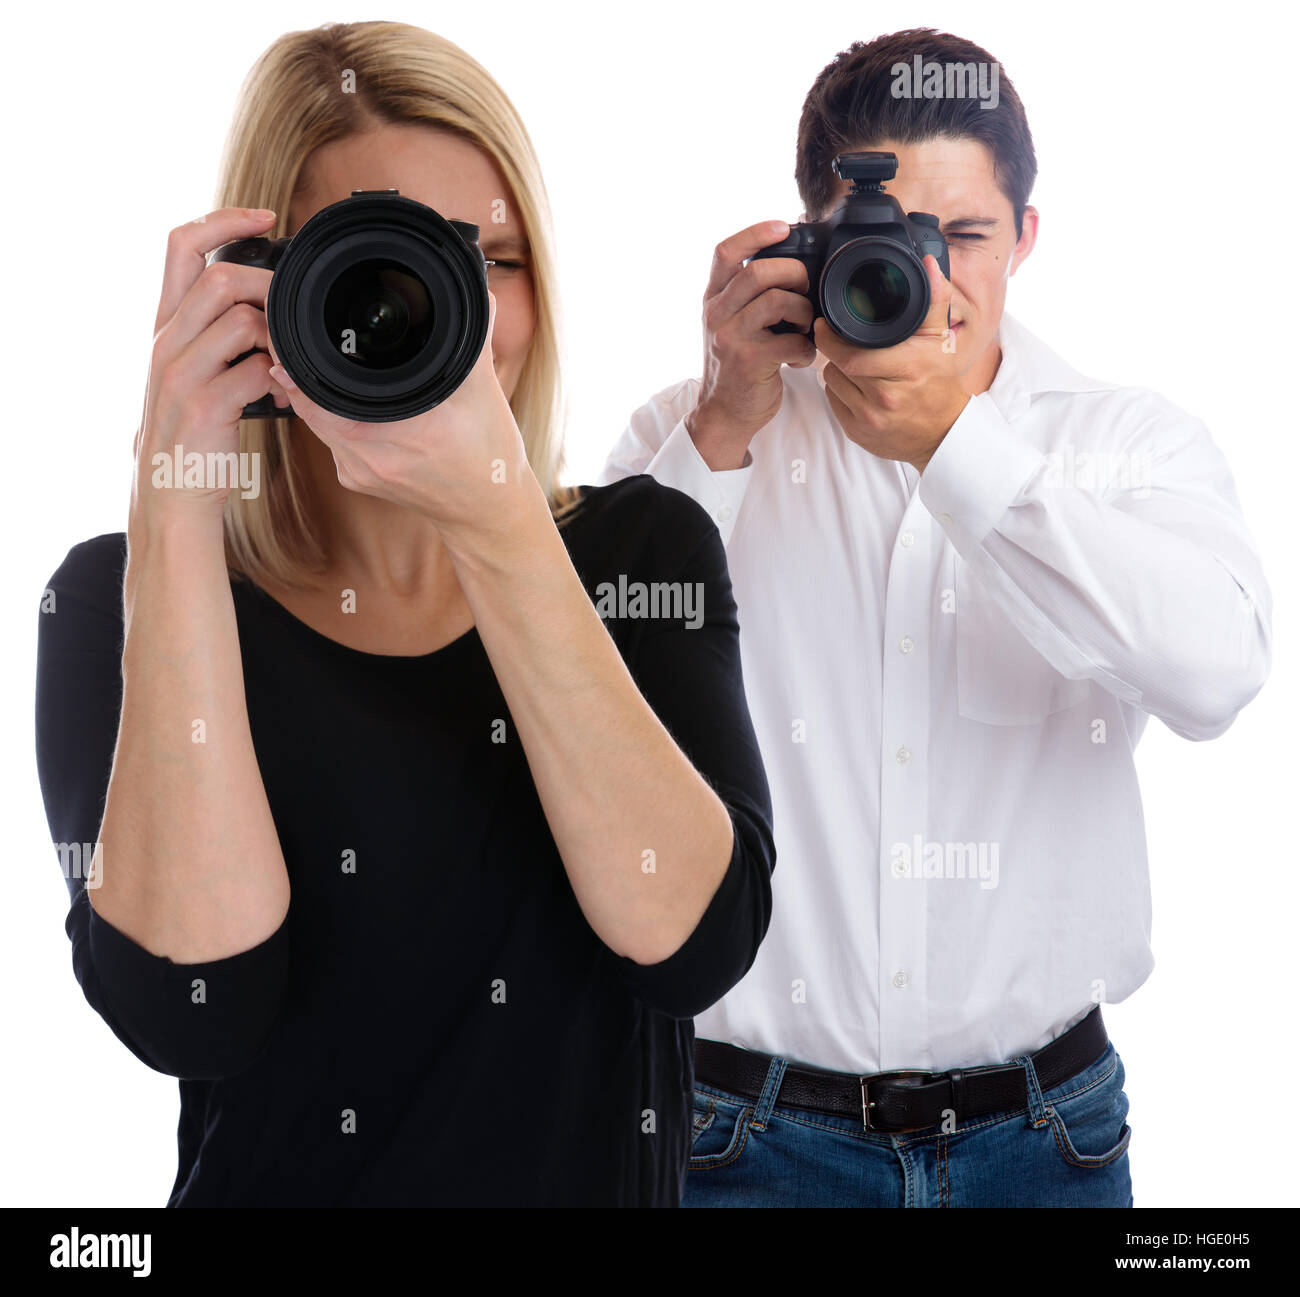 Photographers team photographer young trainee photography photos camera occupation hobby isolated on a white background Stock Photo